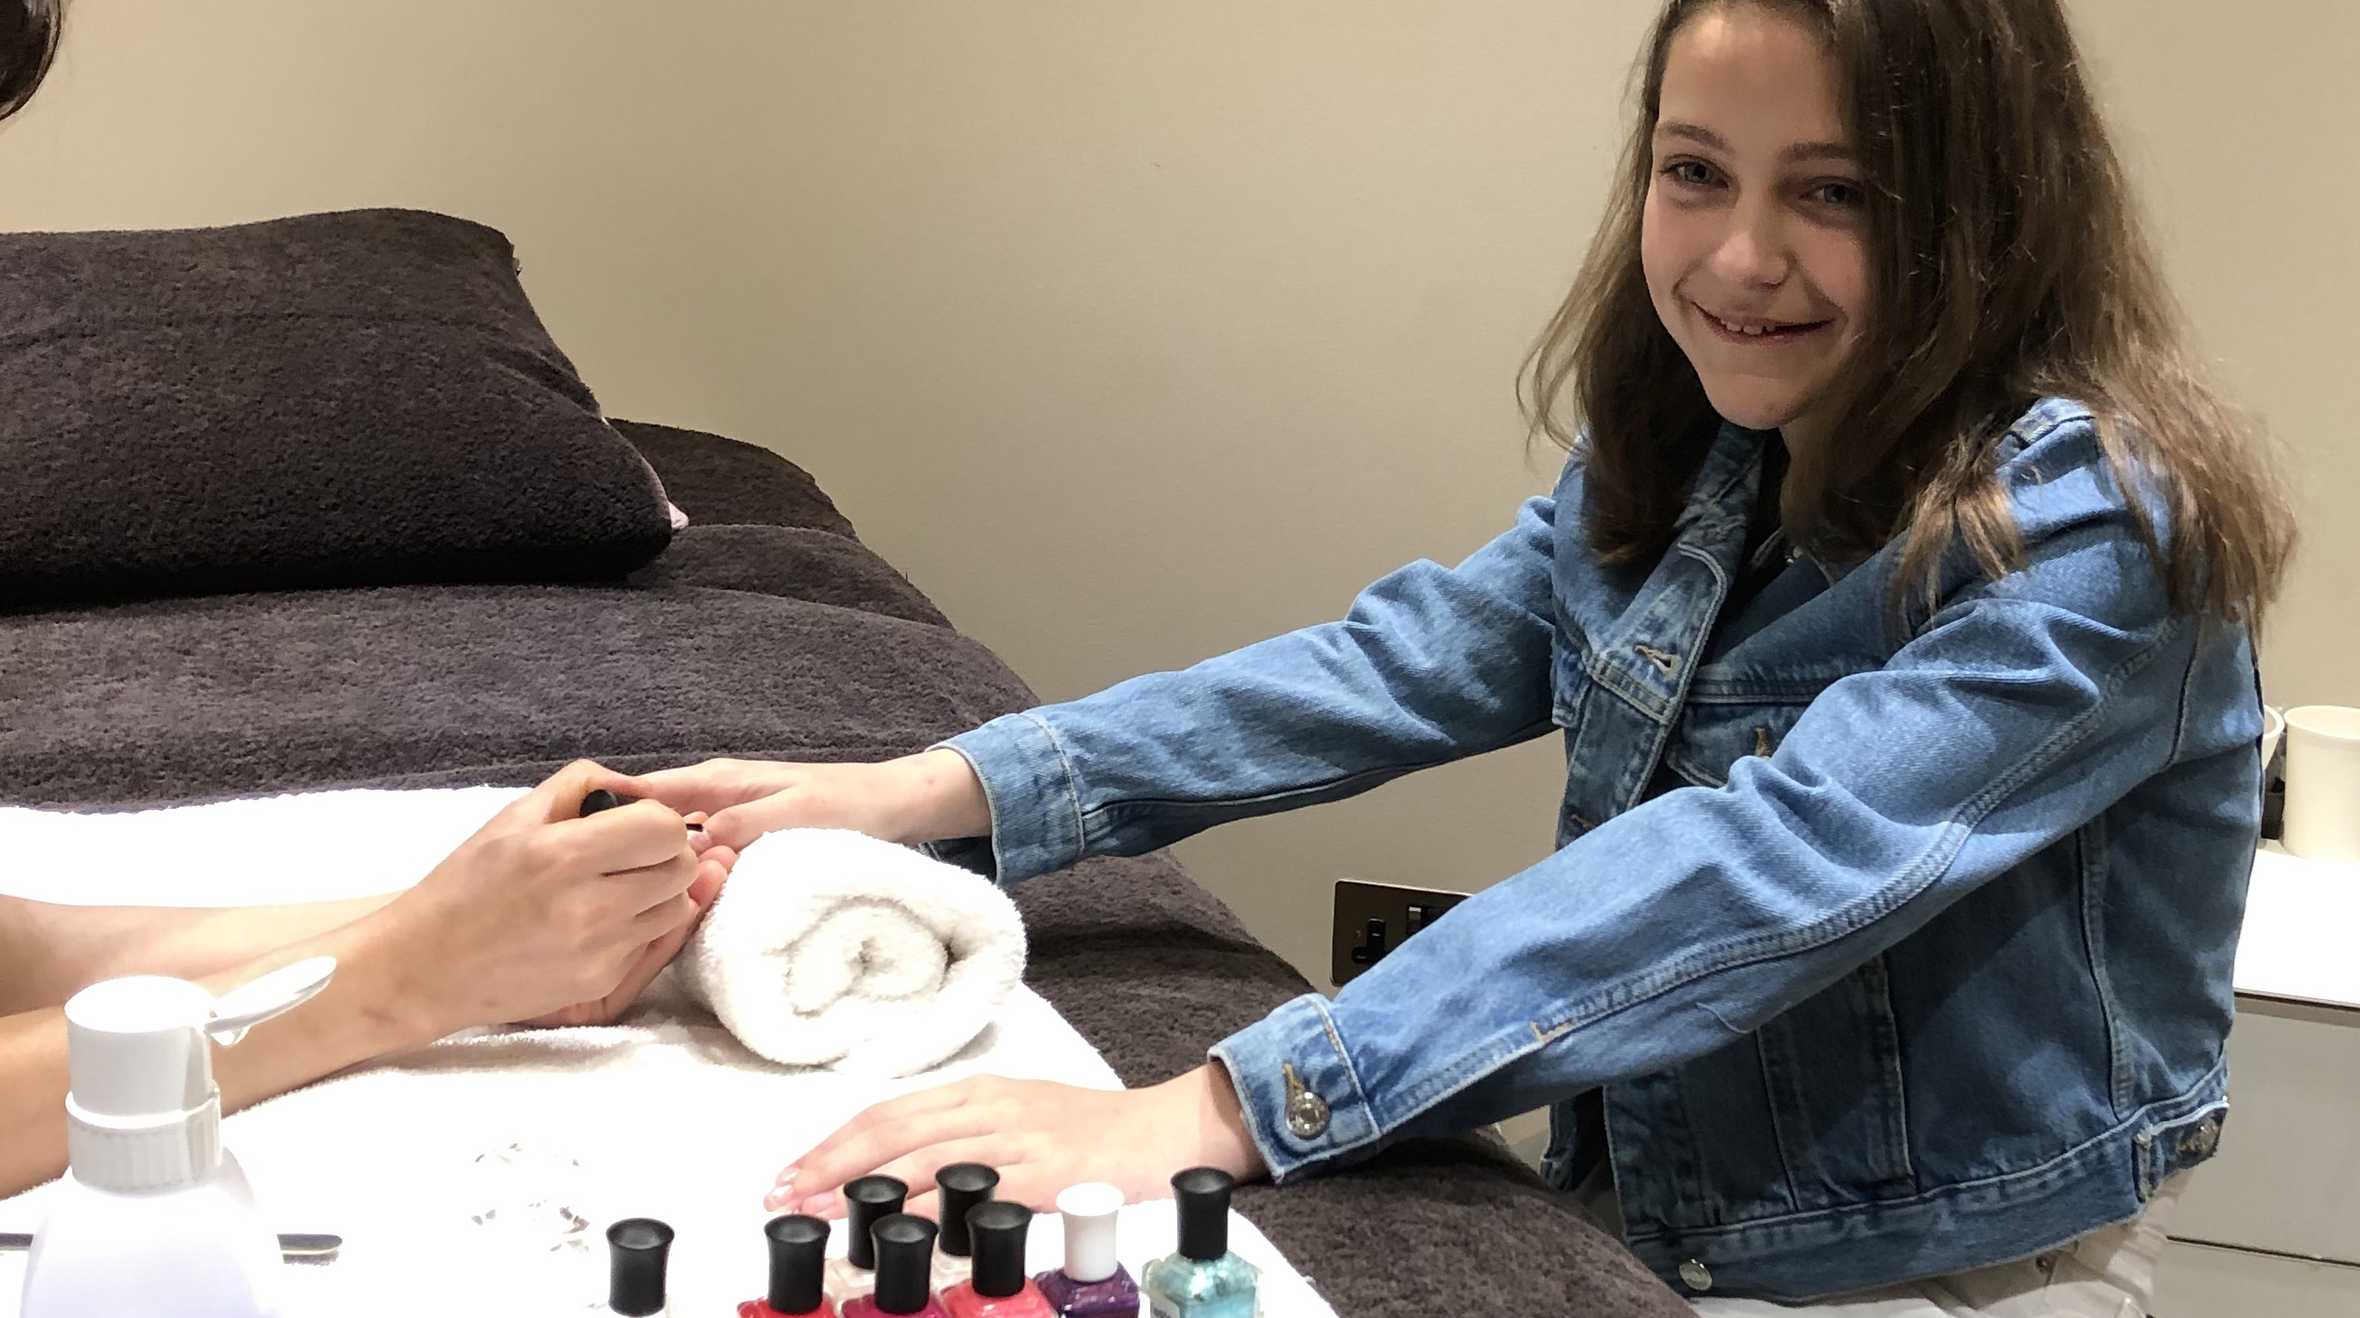 Meadow having her nail done